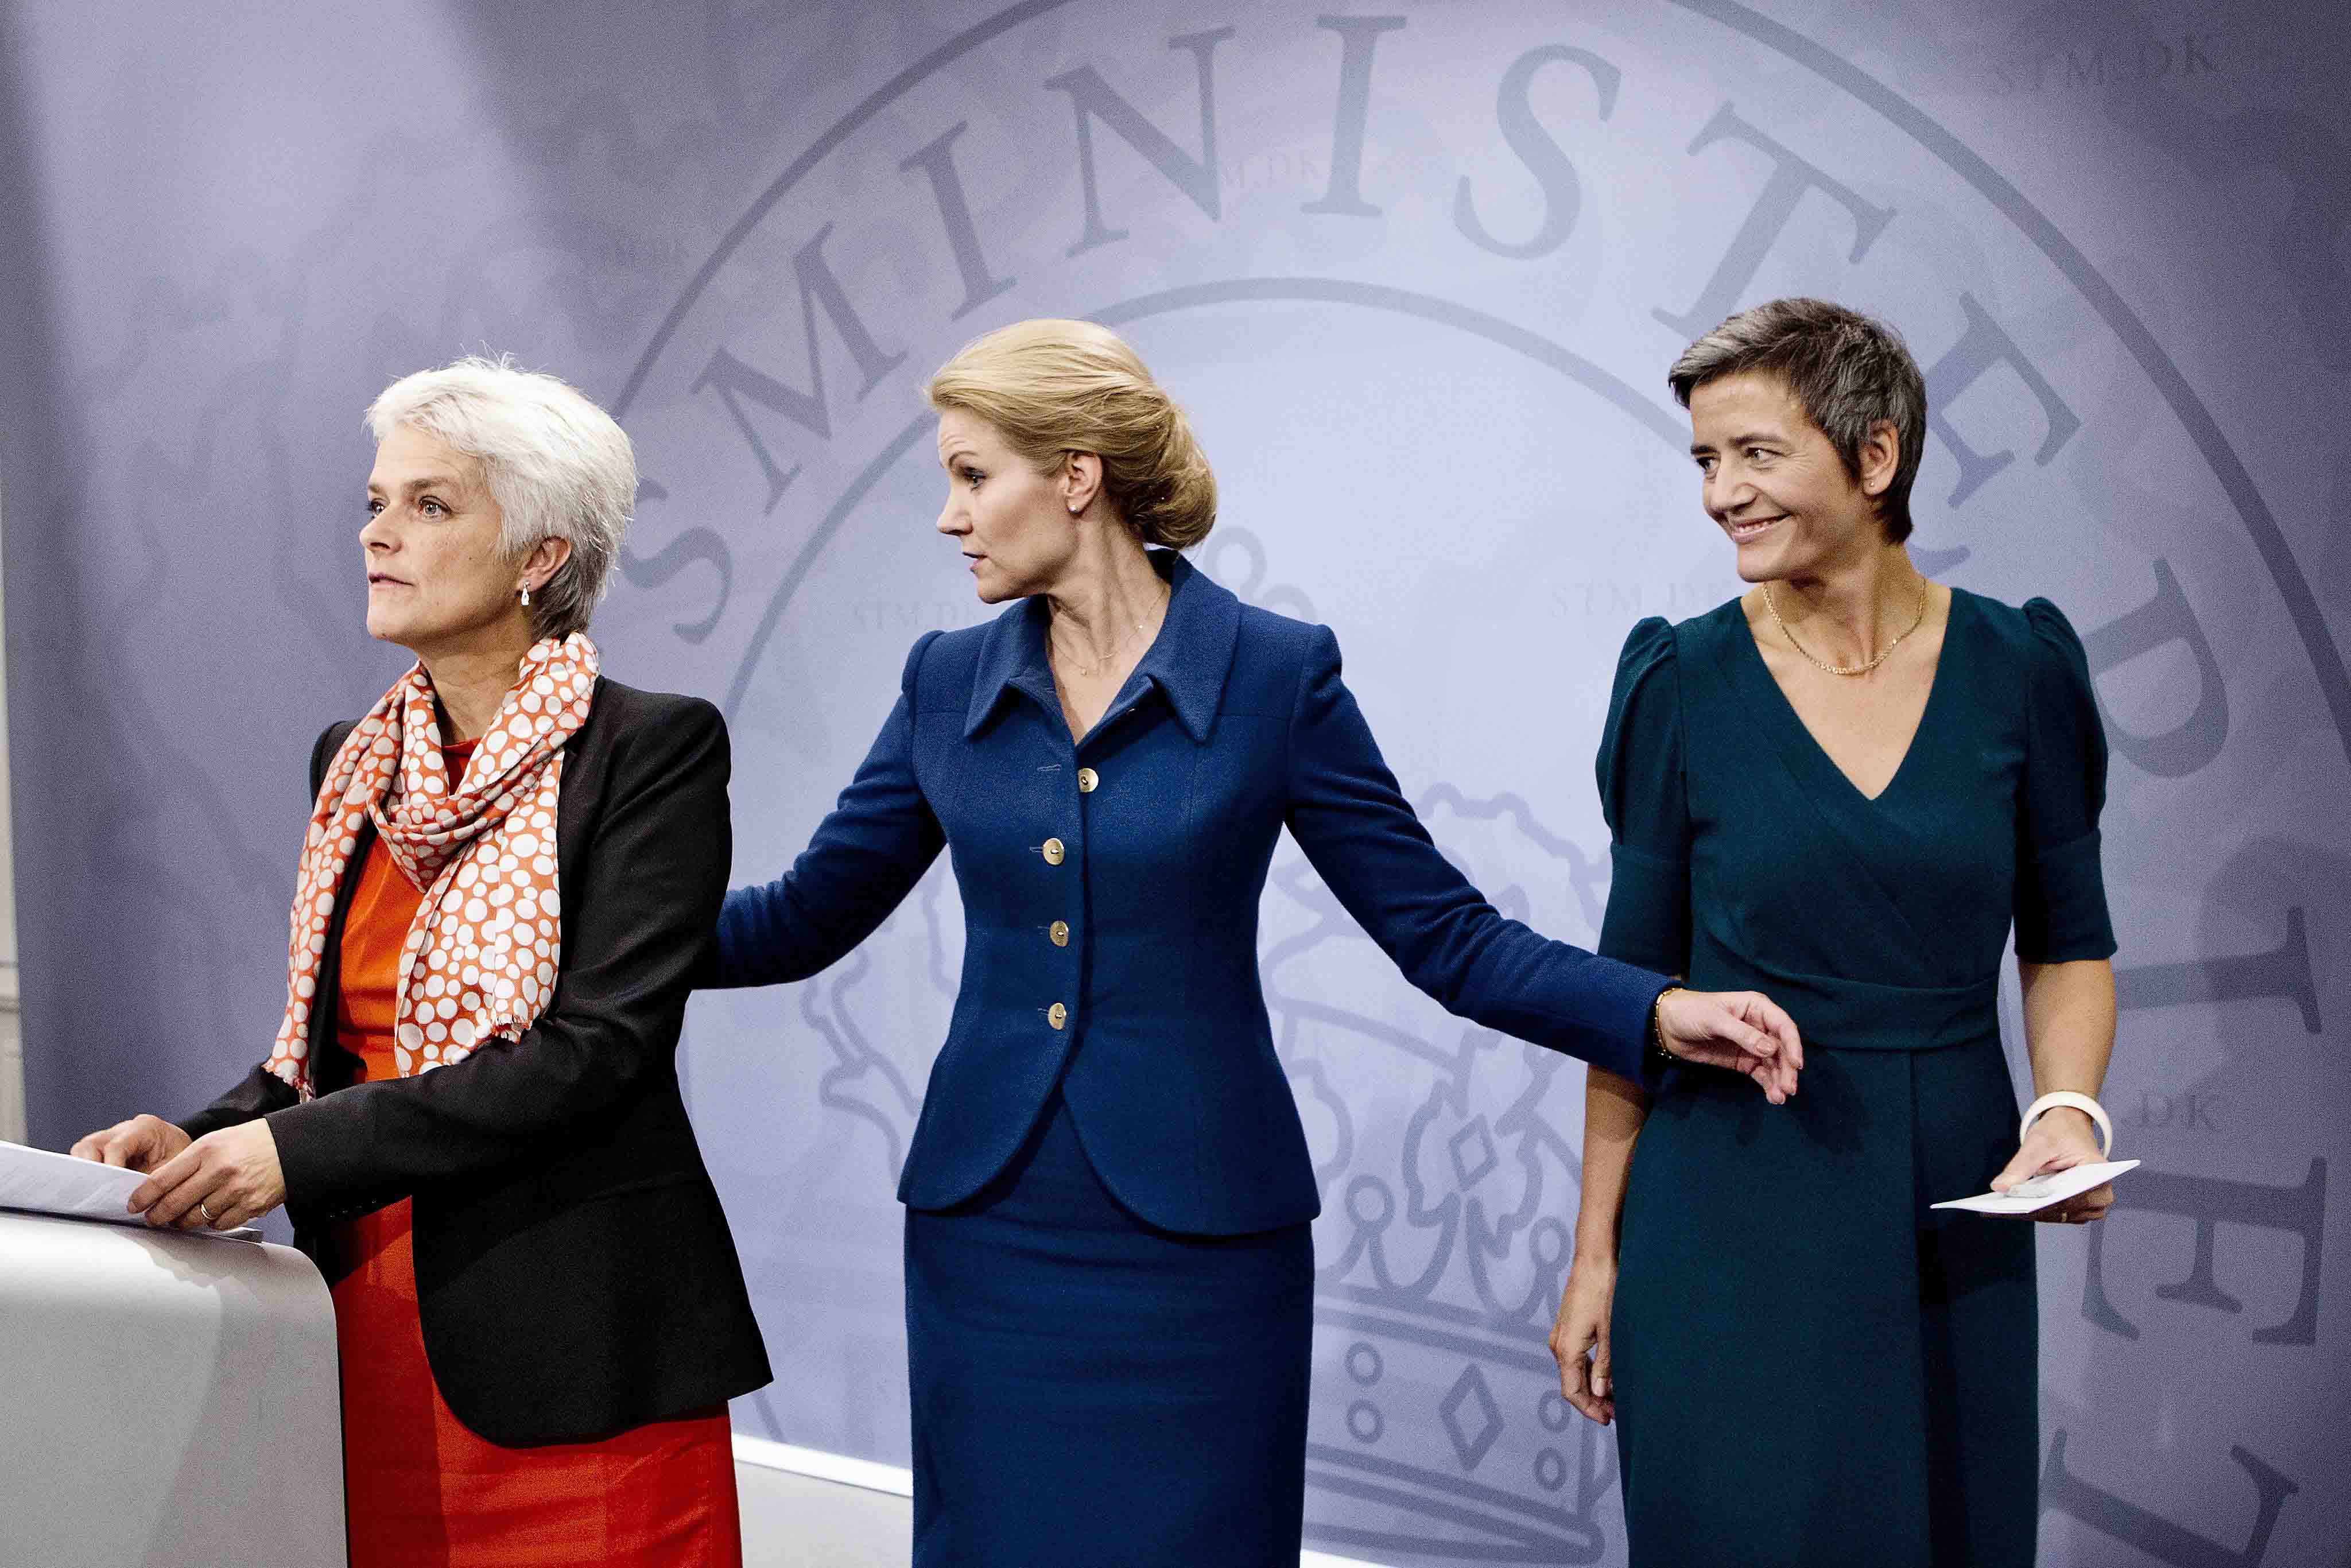 Denmark’s gender equality policies: no quotas and a focus on men 